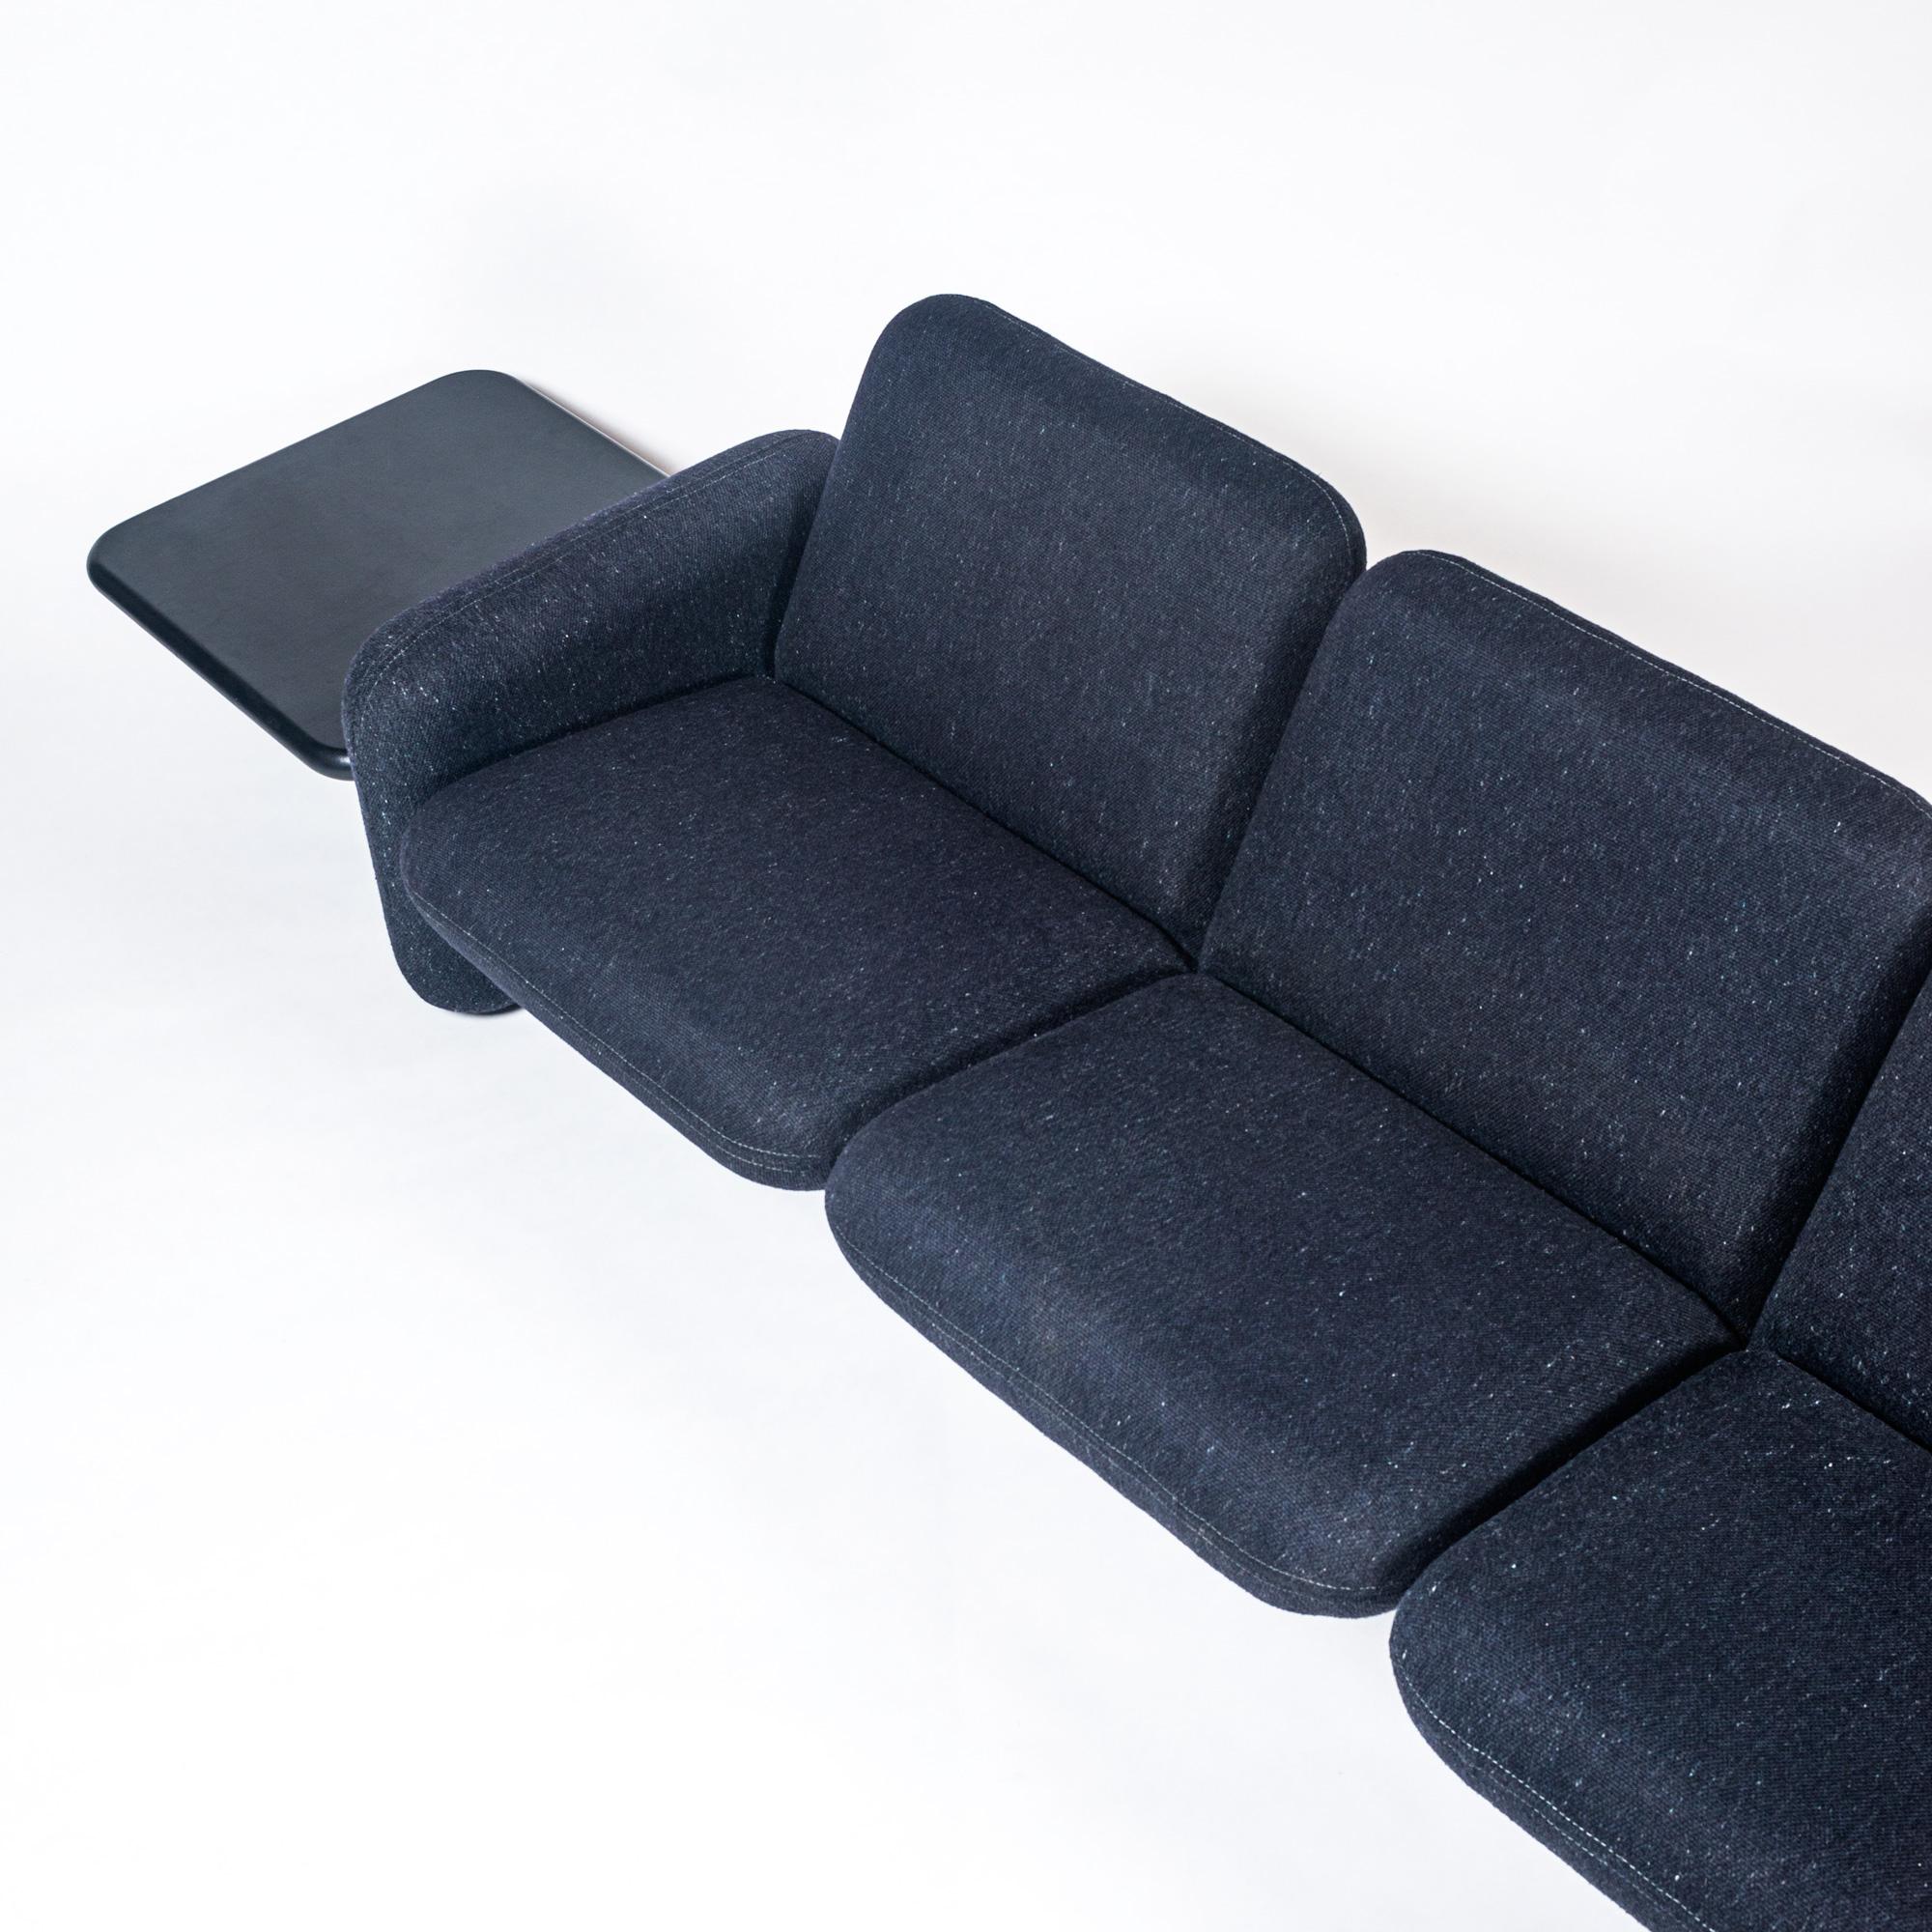 3 seater chiclet sofa with black leather-top side tables, designed by Ray Wilkes for Herman Miller, circa 1970s. Sofa is in original blue & black wool fabric. Can fabricate new side tables in hardwood for an additional fee.
 